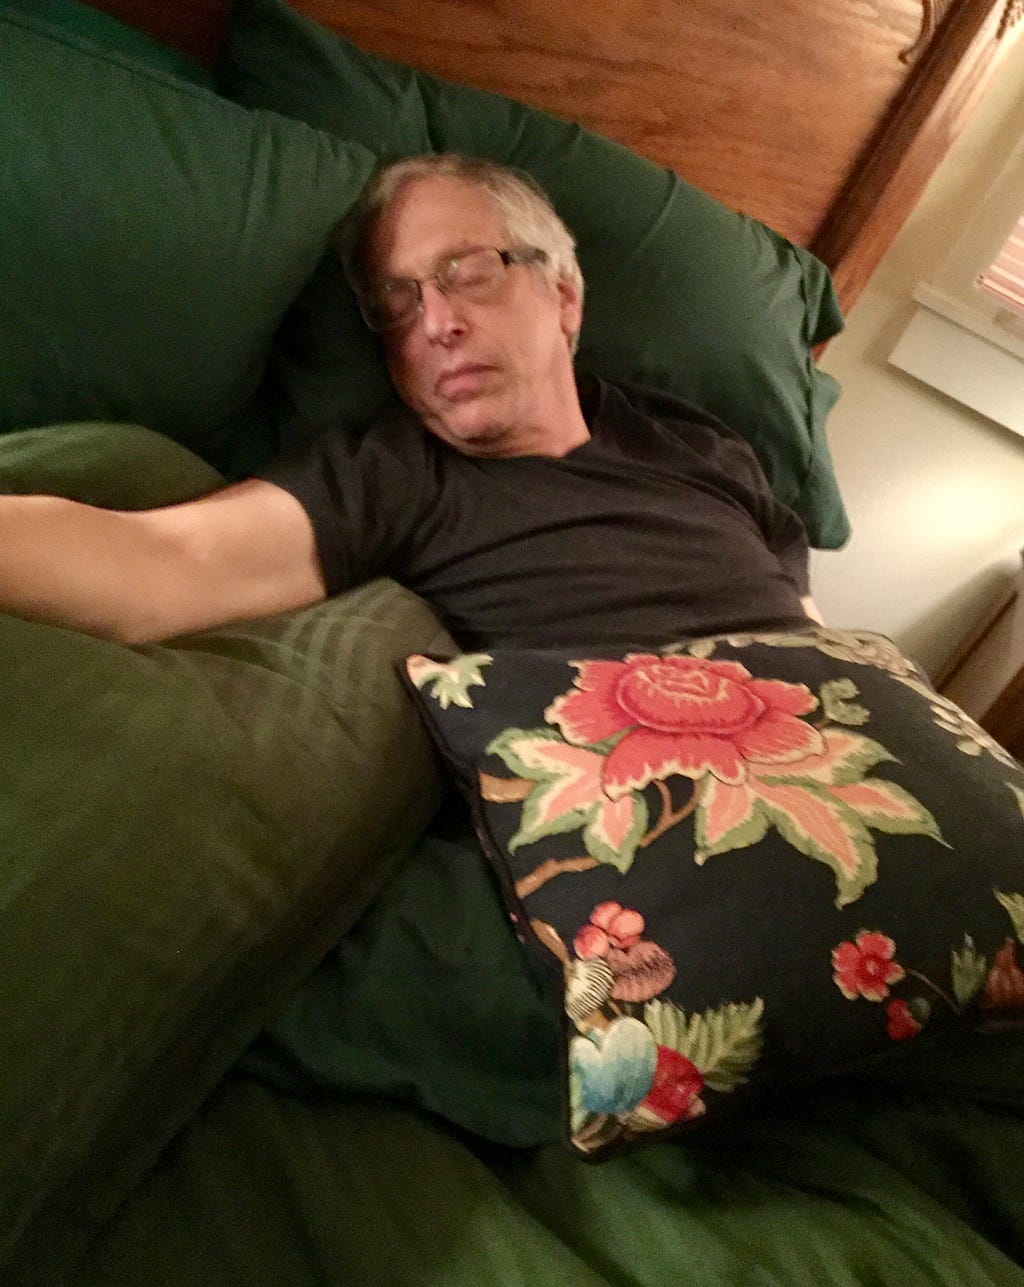 Photo of an exhausted husband provided by the author